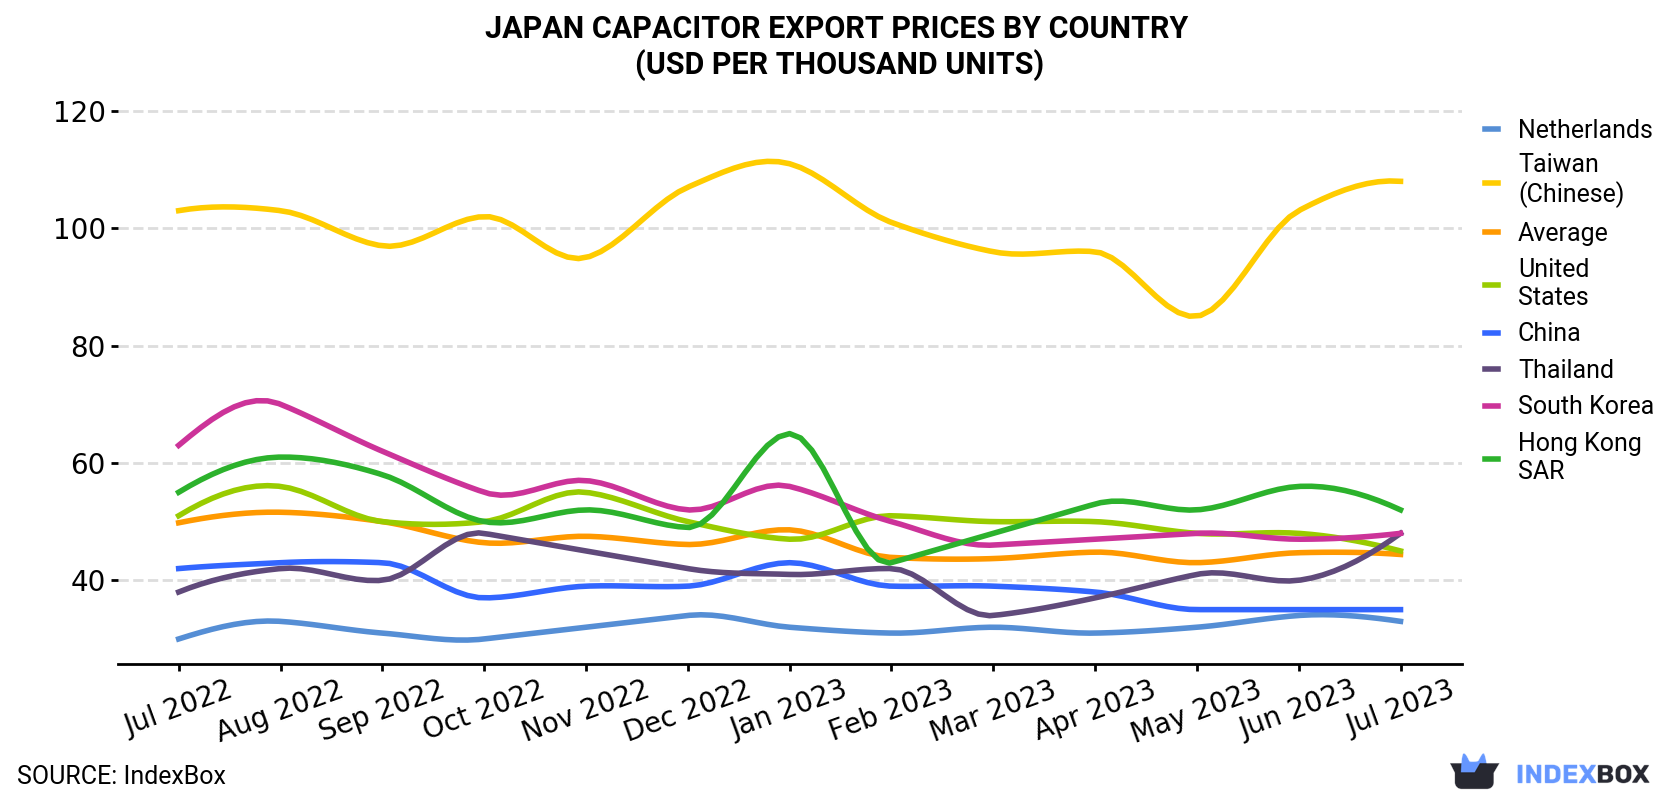 Japan Capacitor Export Prices By Country (USD Per Thousand Units)